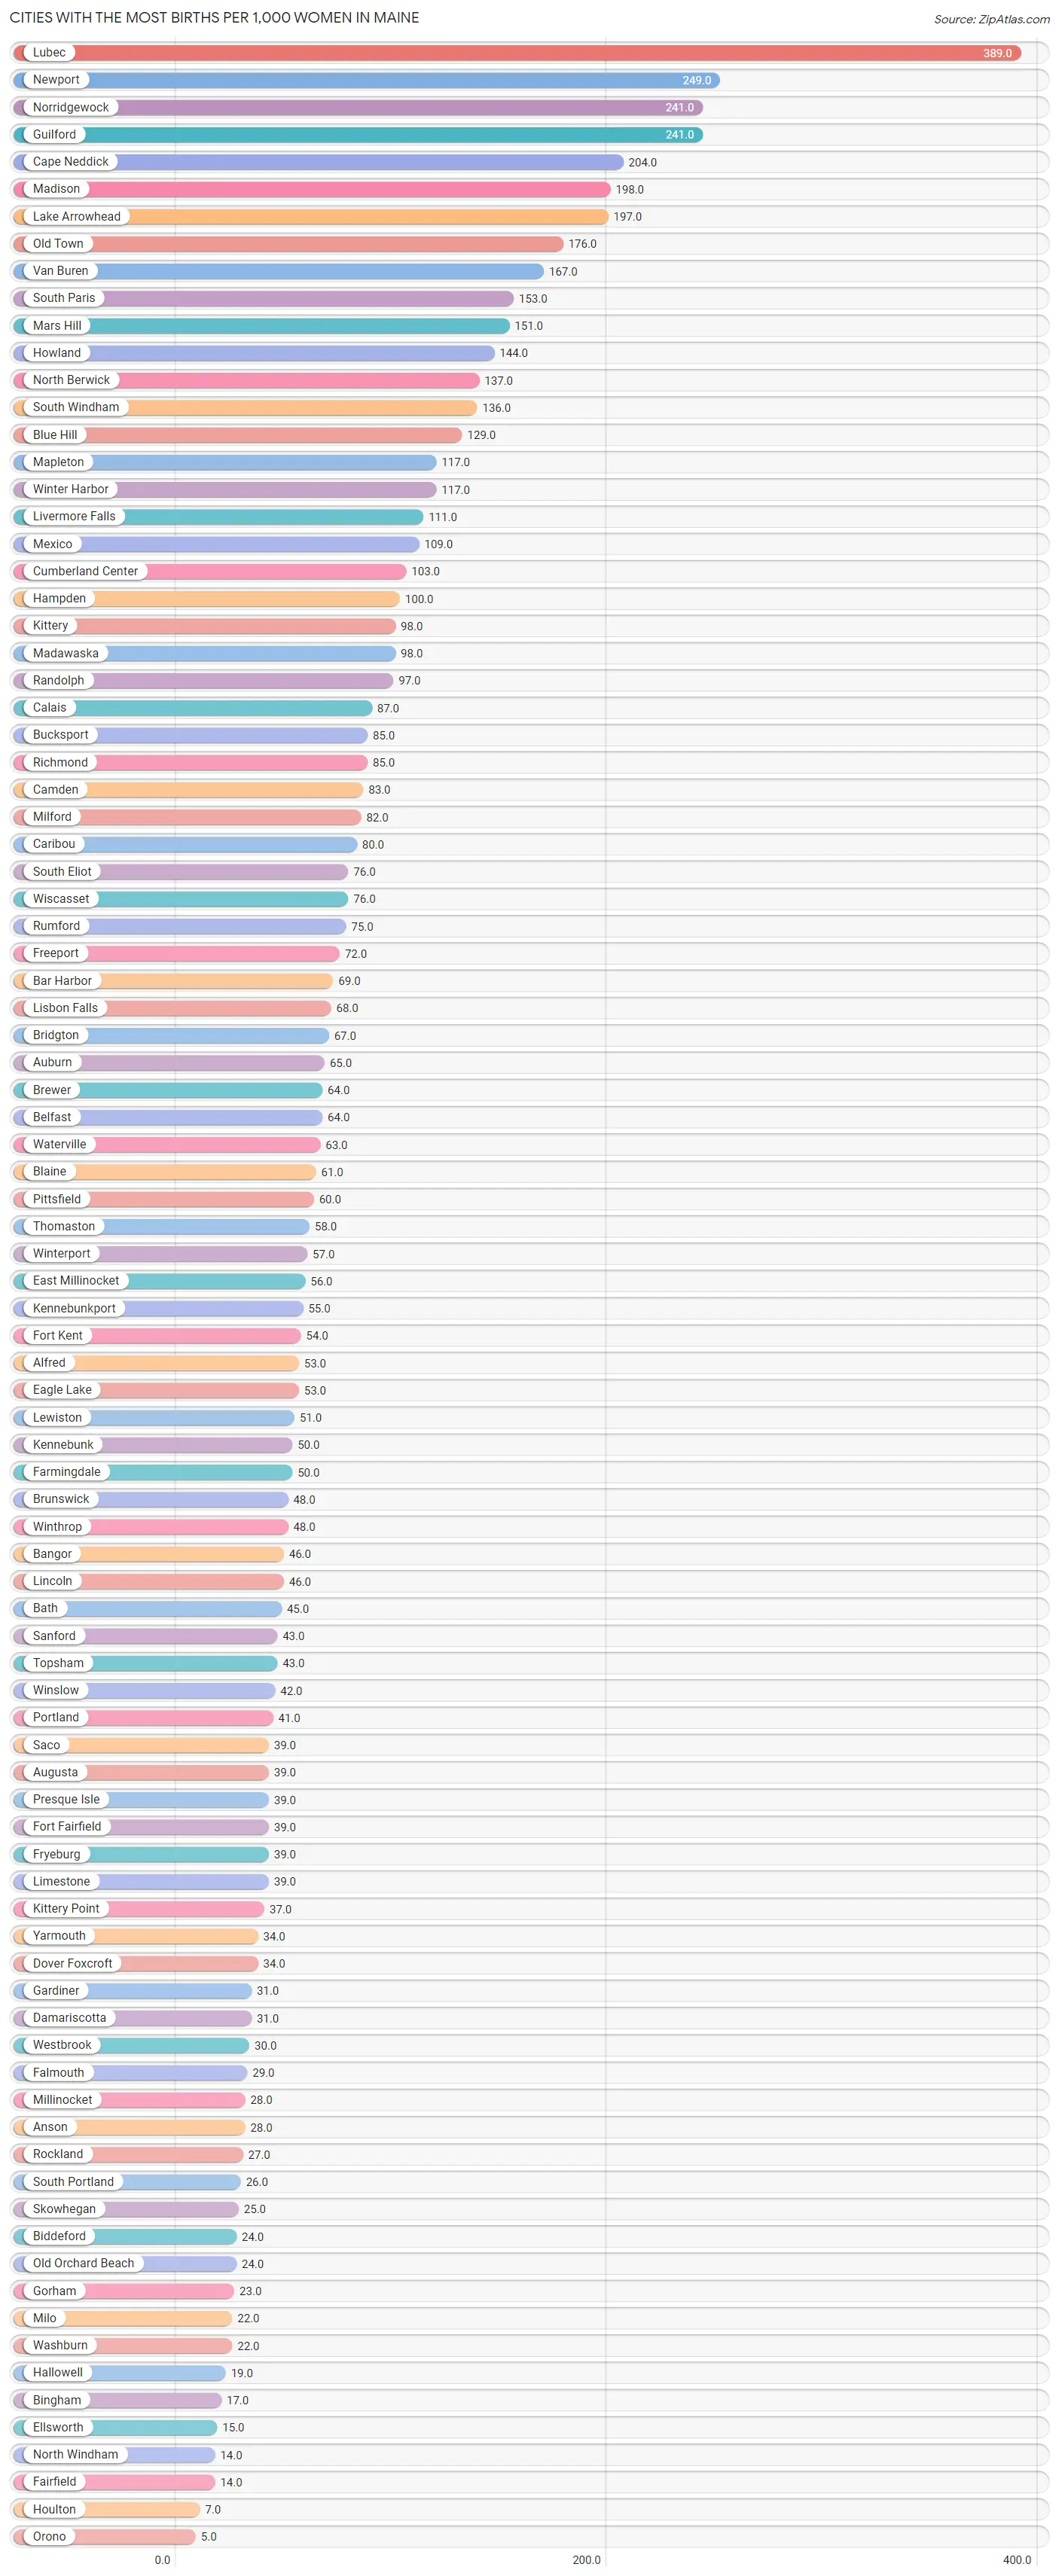 Cities with the Most Births per 1,000 Women in Maine Chart